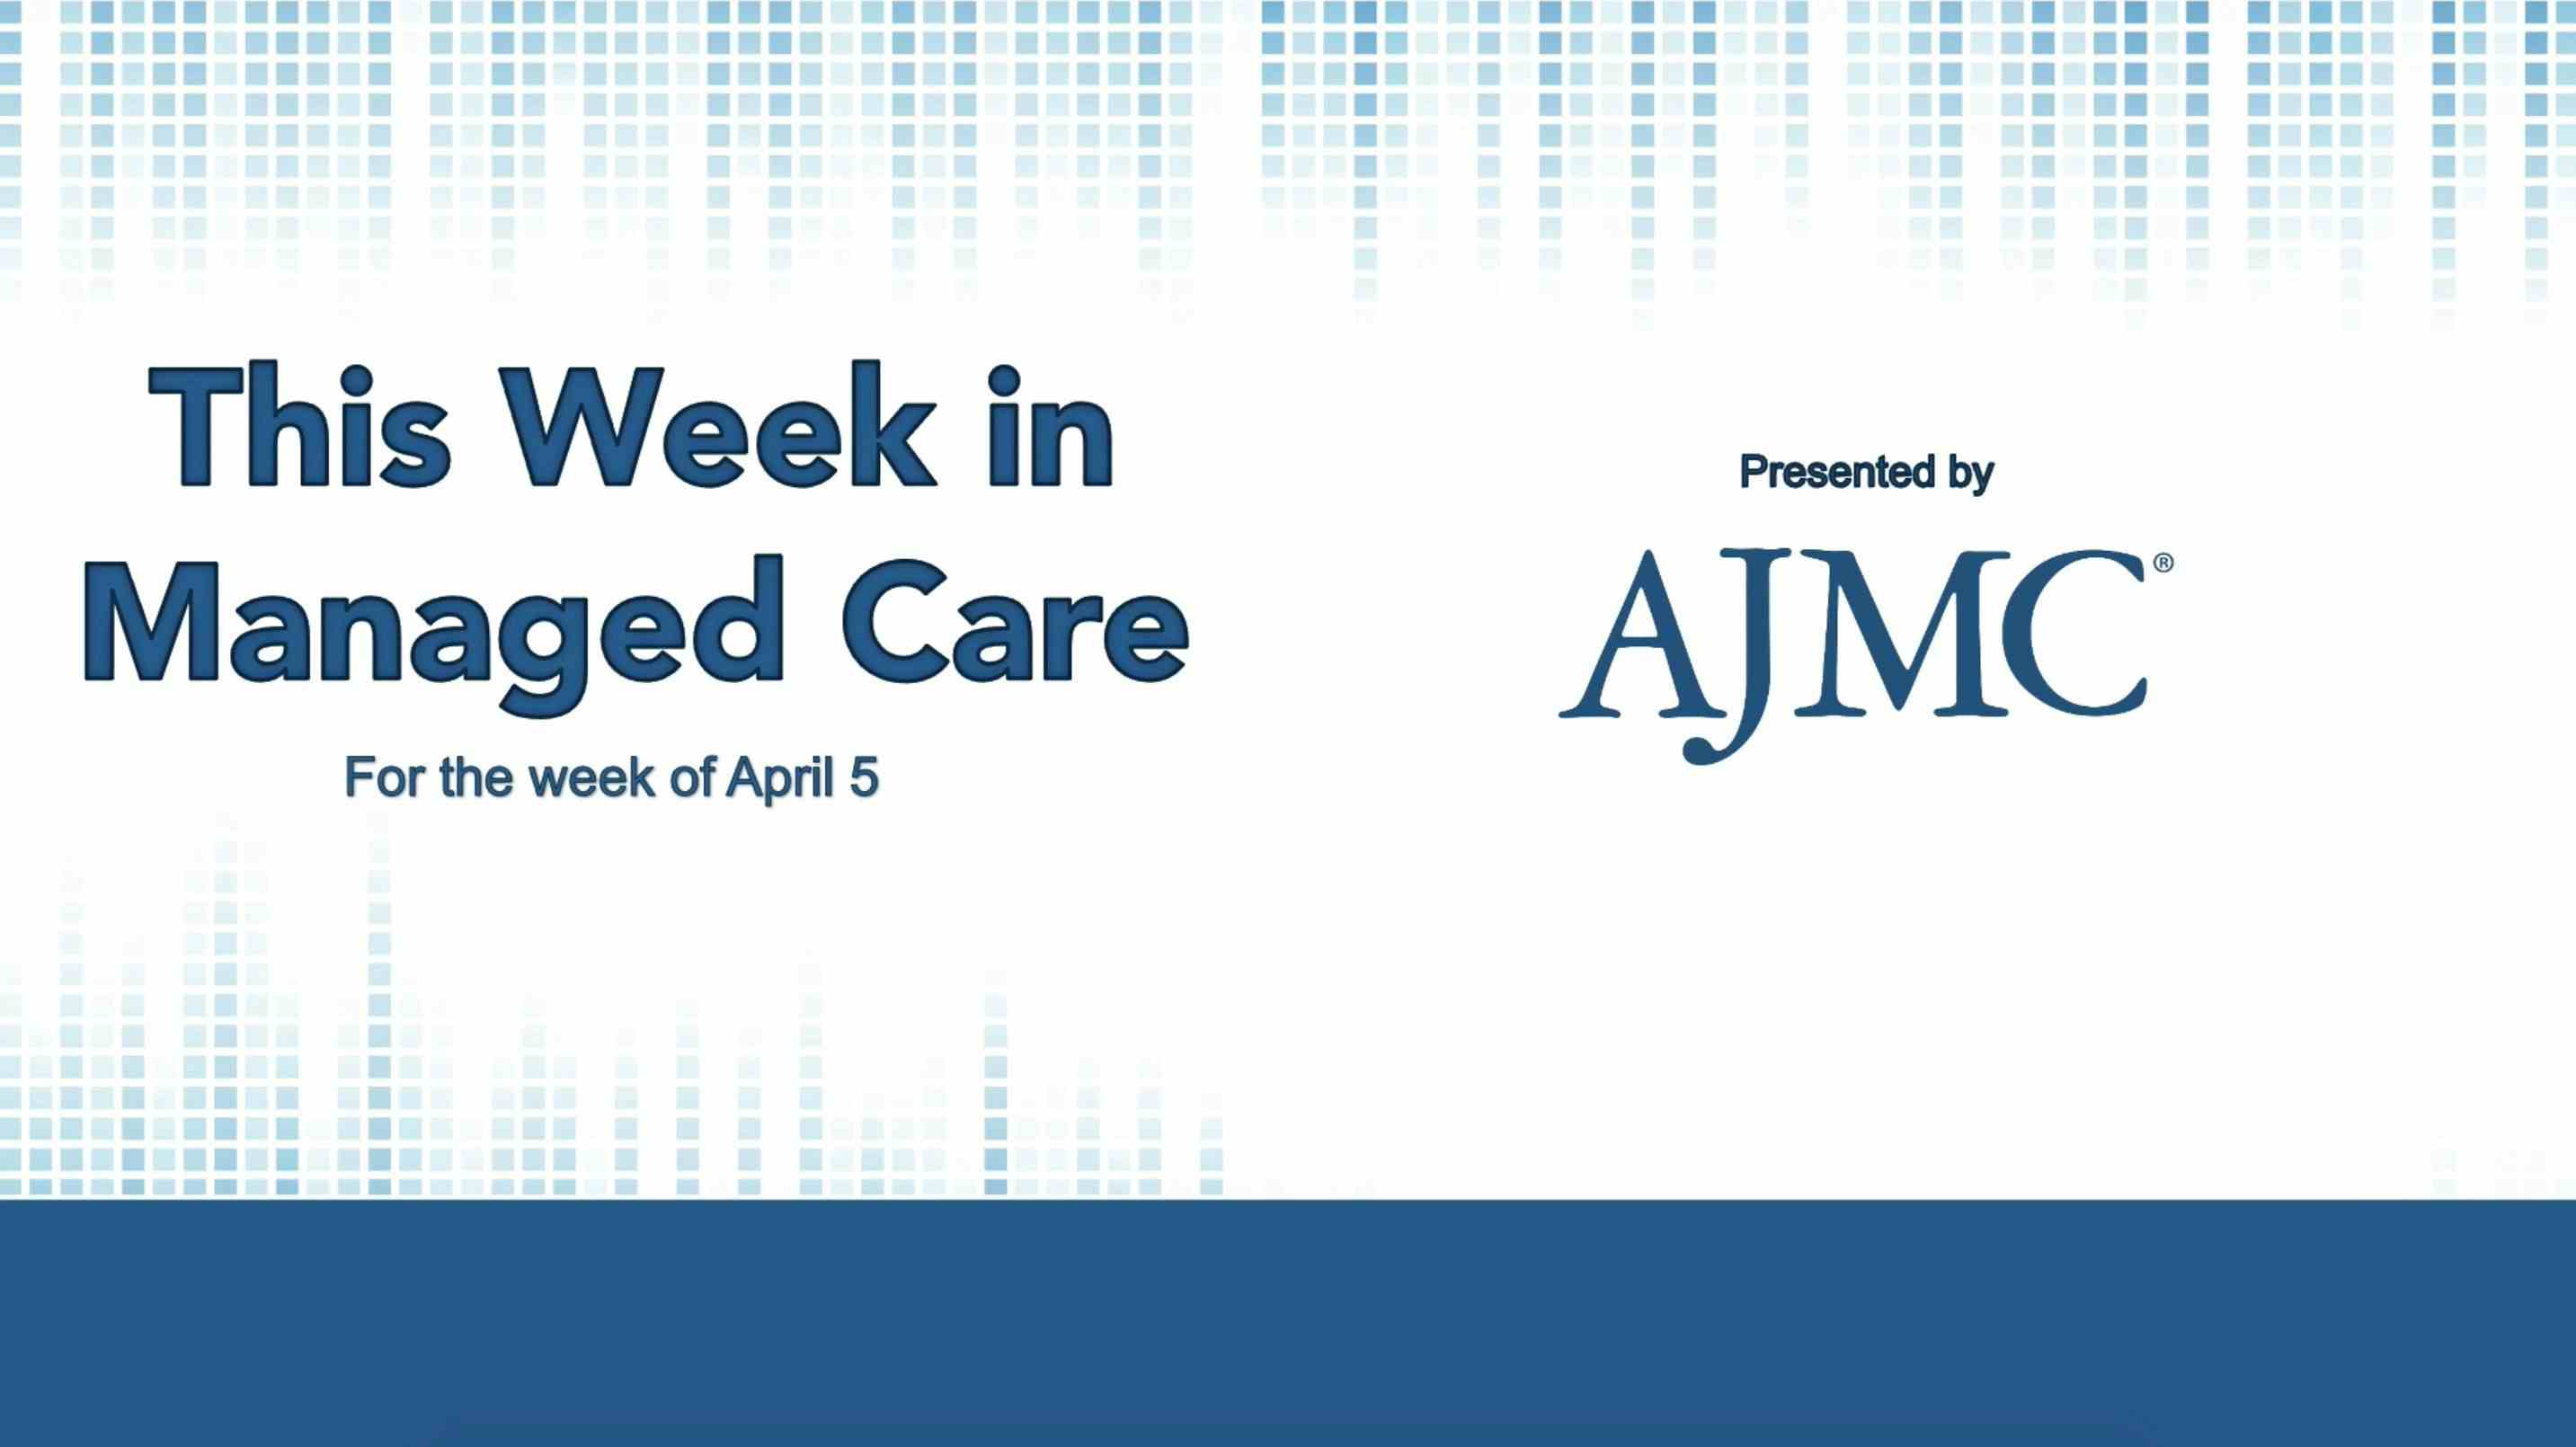 This Week in Managed Care: April 9, 2021